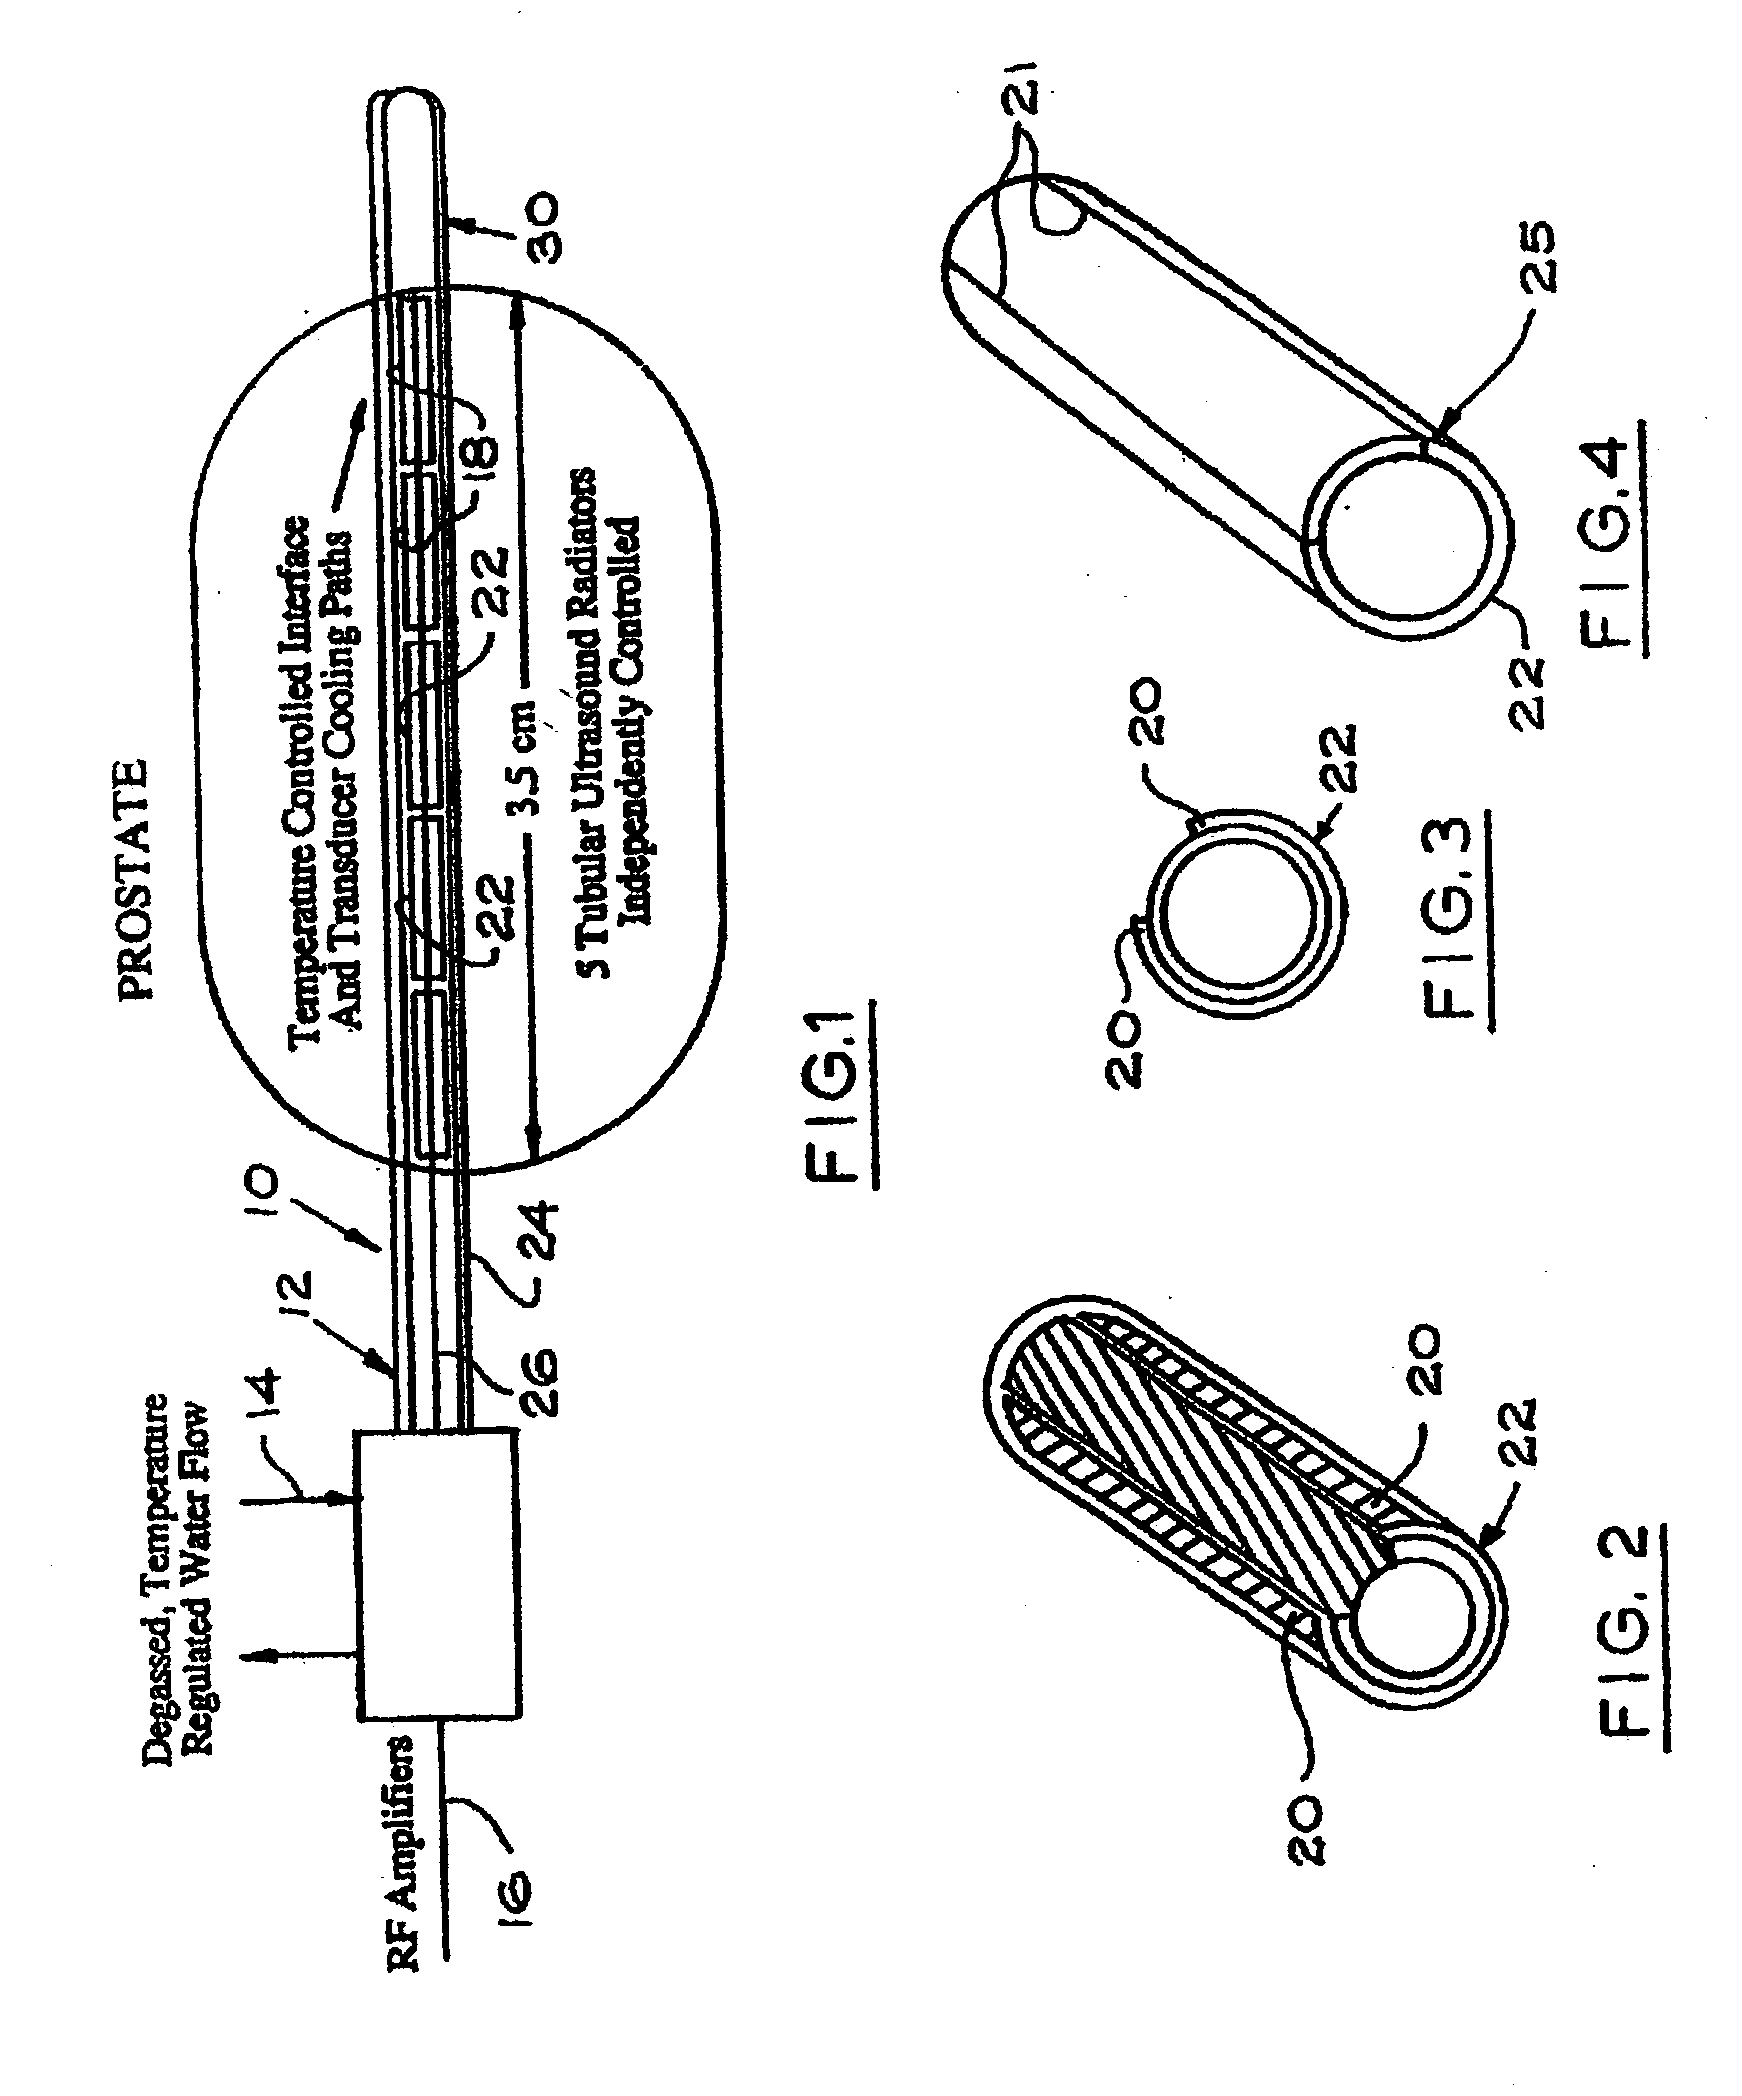 Method of manufacture of a transurethral ultrasound applicator for prostate gland thermal therapy